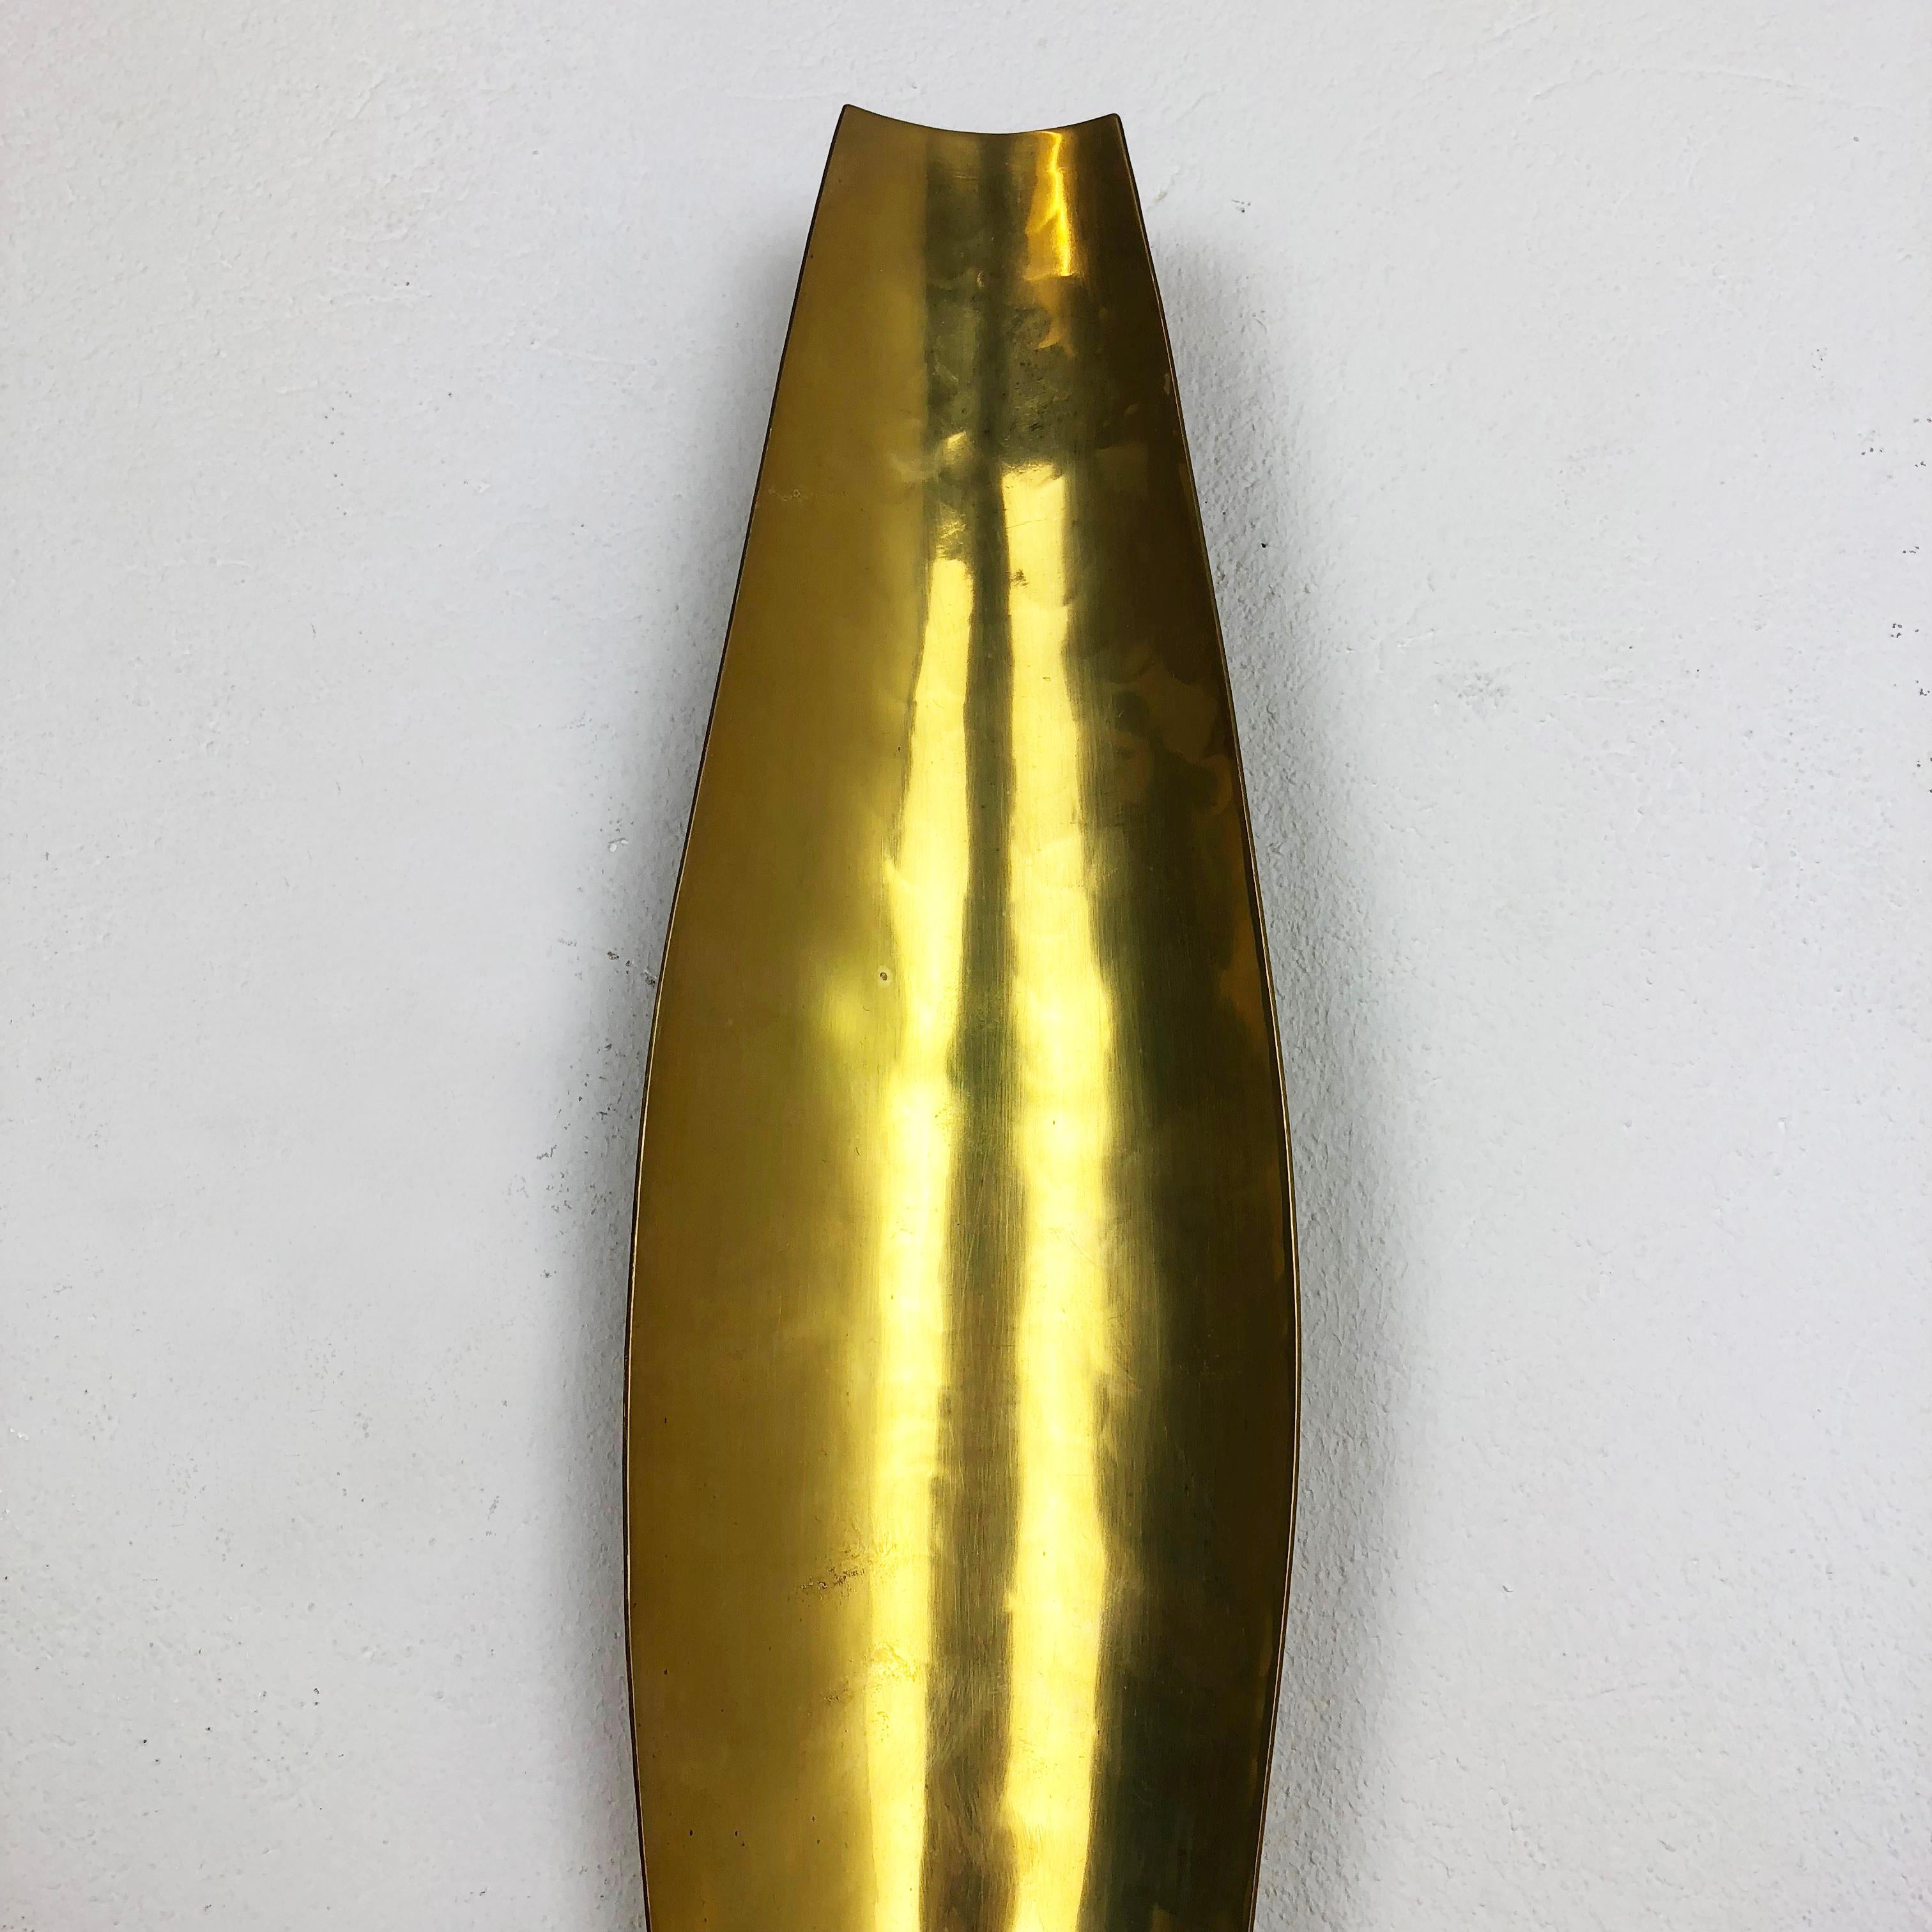 Mid-Century Modern Brutalist Brass Wall Candleholder by Emil Funk KG, Germany, 1950s For Sale